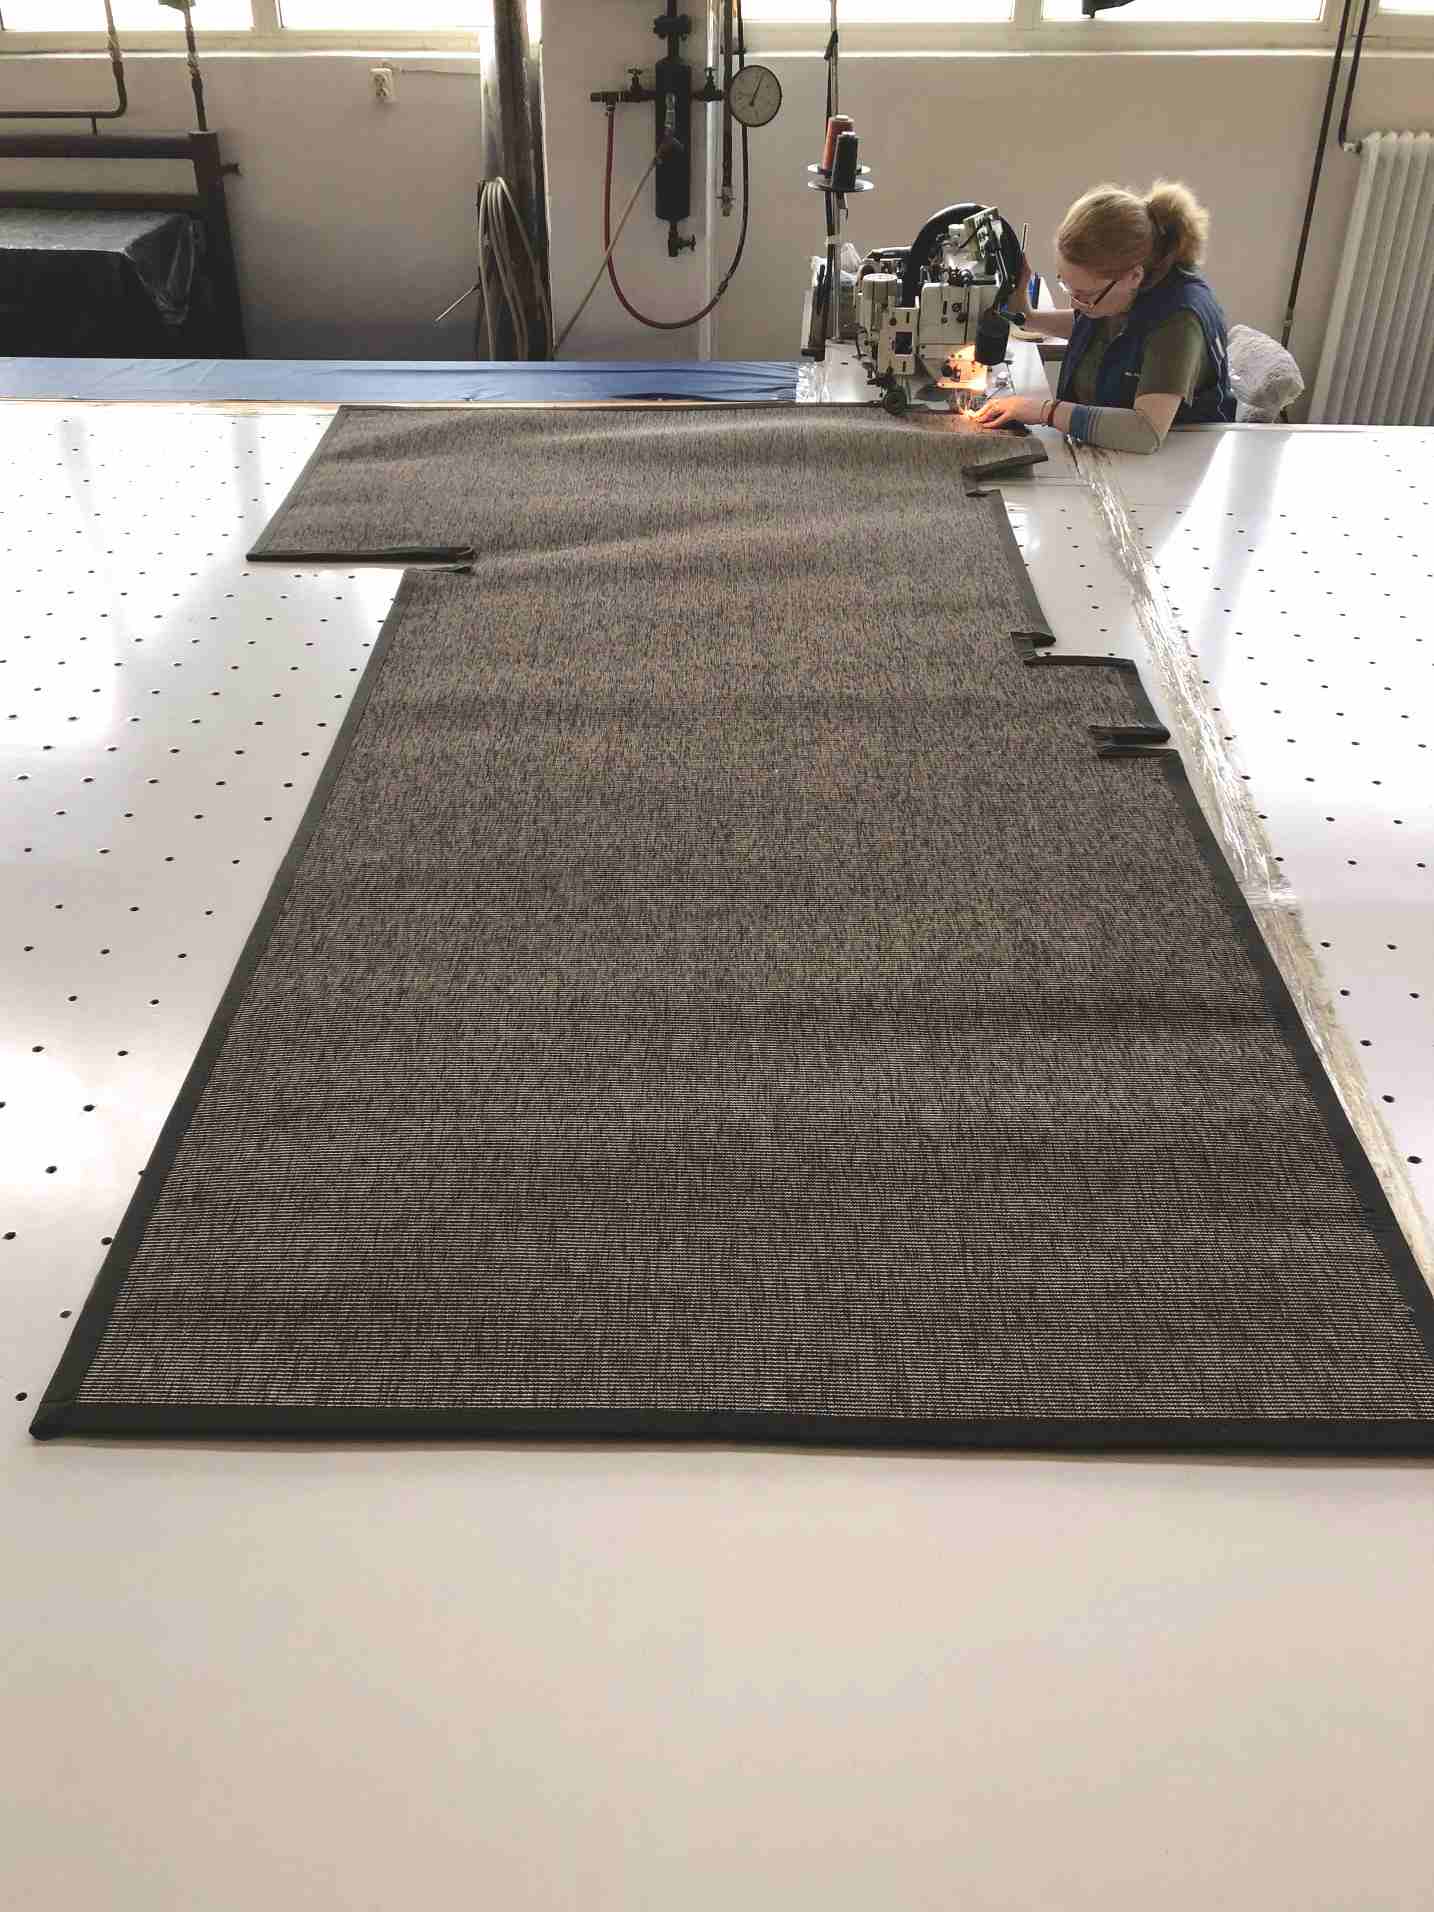 Photo from the production of a very elaborately made carpet according to a template.